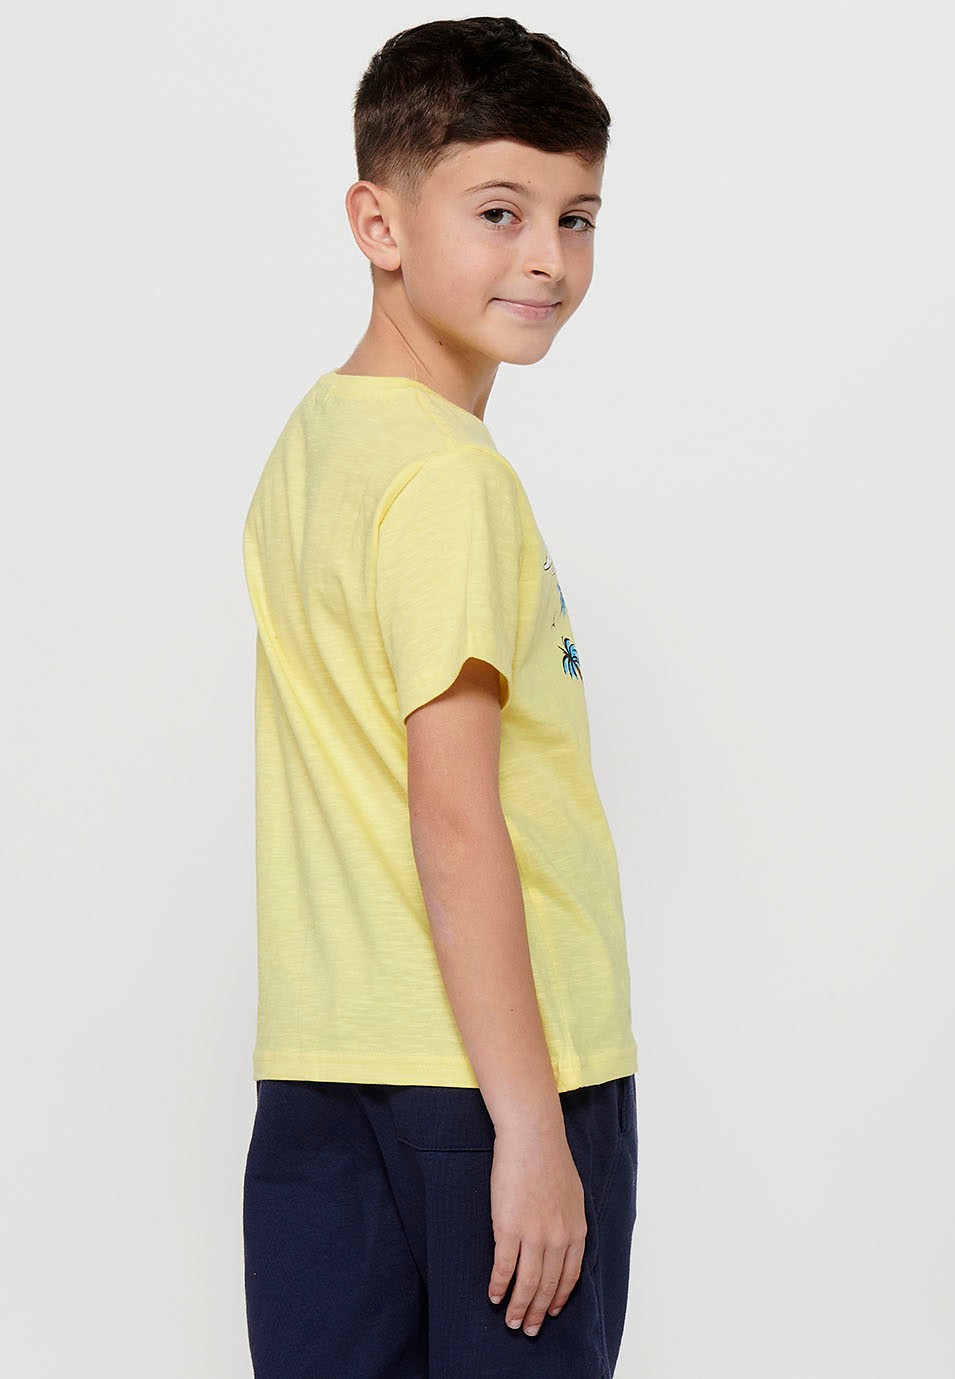 Short-sleeved cotton T-shirt with a round neckline. Yellow front print for Boys